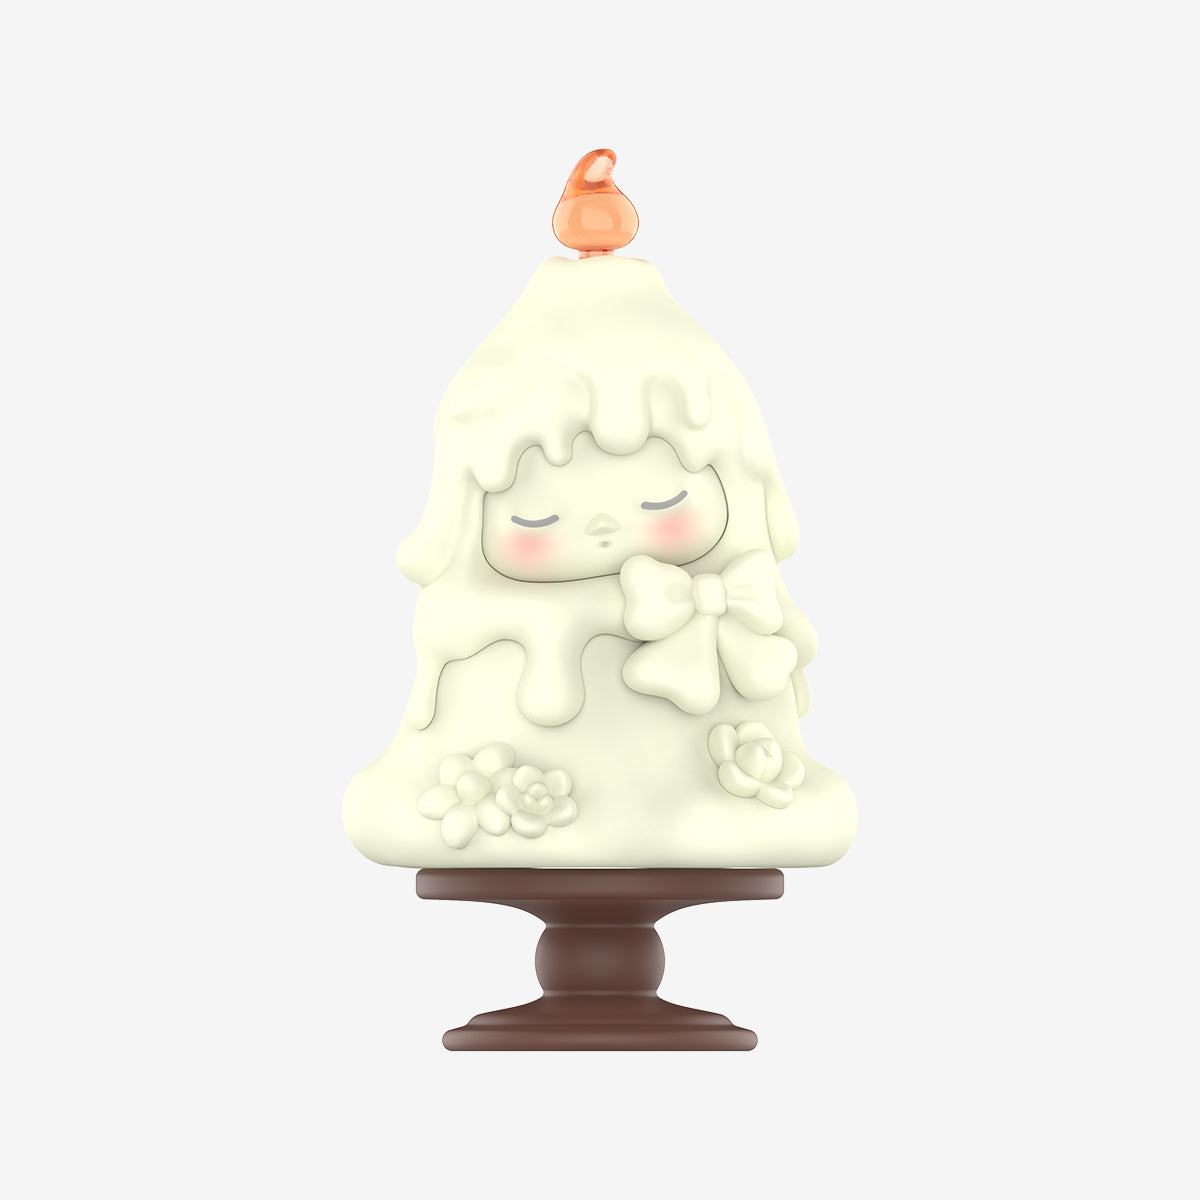 【NEW】Pop Mart Pucky Home Time Series Blind Box Figure